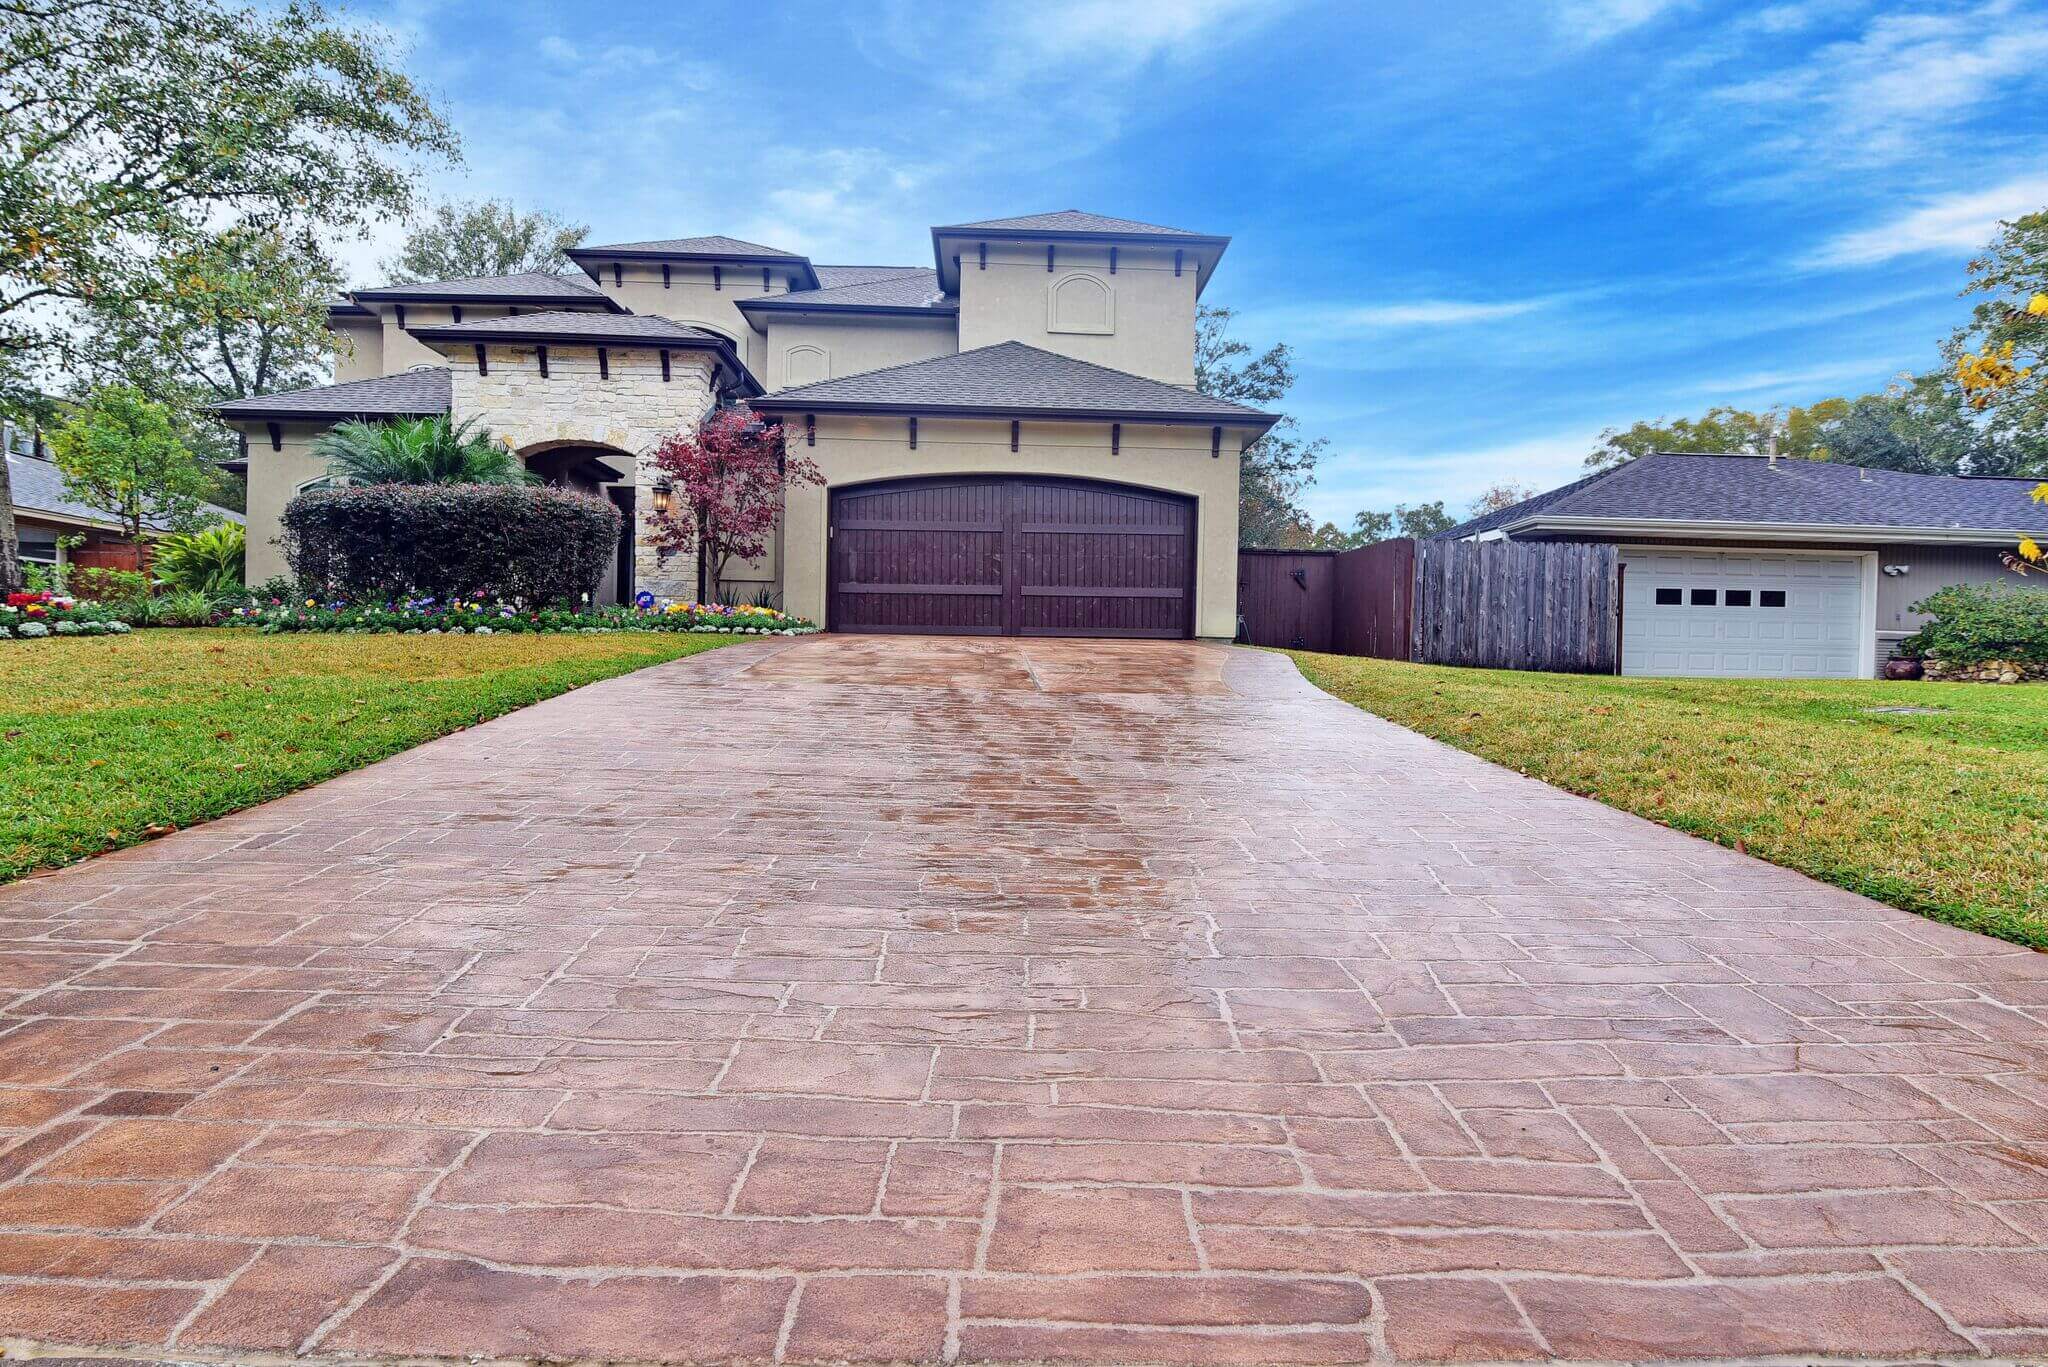 Carvestone concrete overlay driveway product hand-carved and hand-troweled design